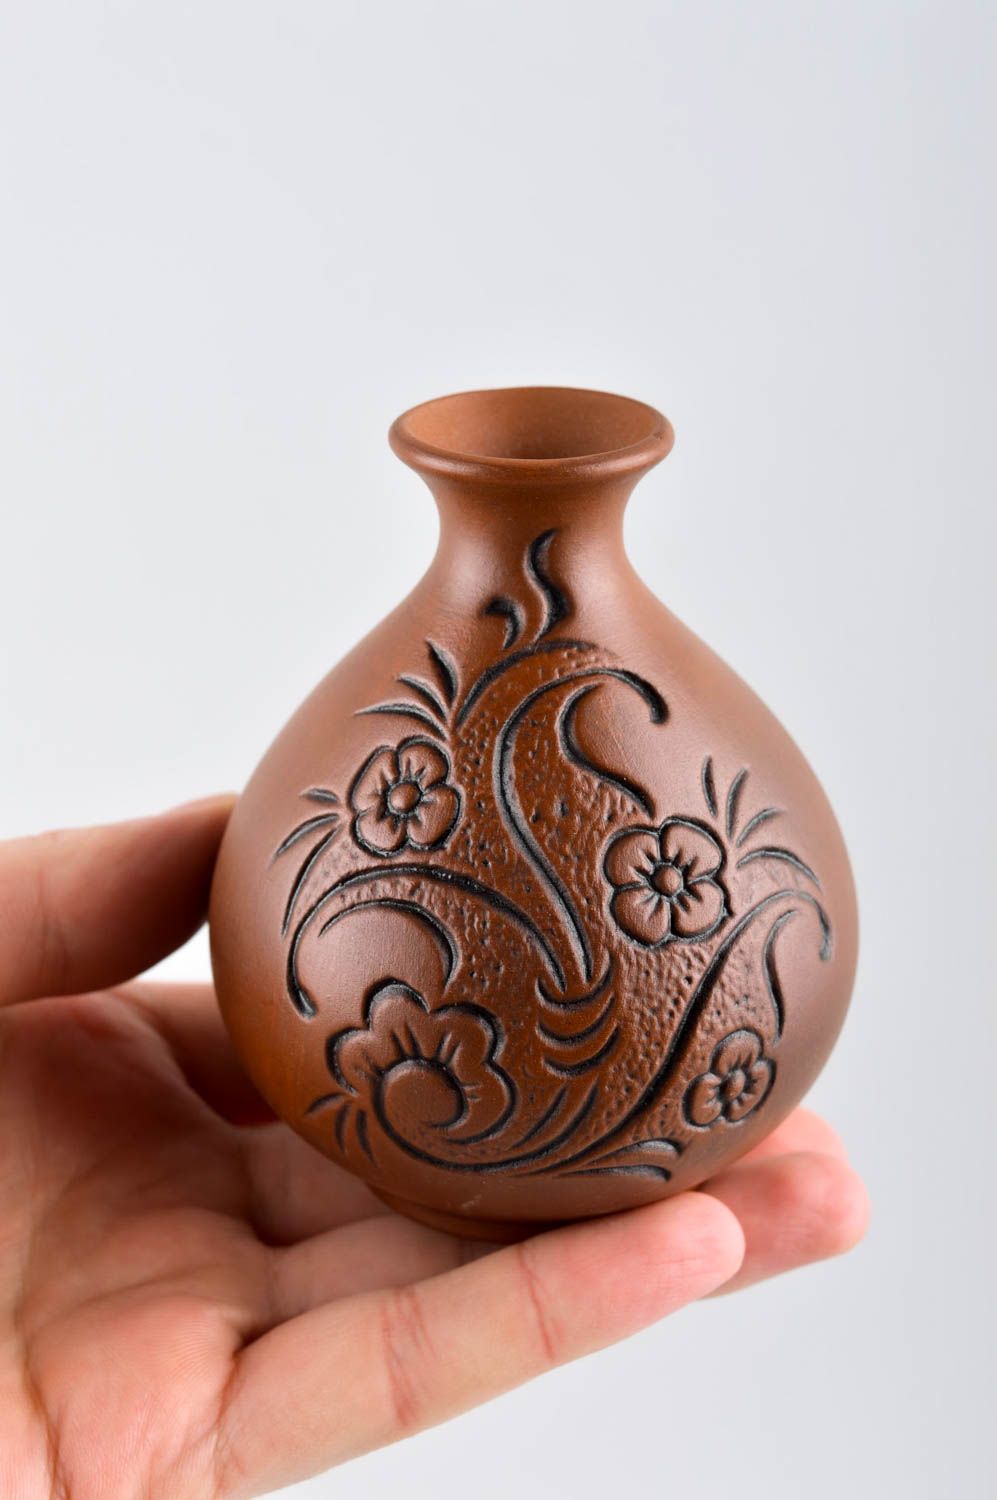 15 oz ceramic wine carafe with hand carvings in floral design 0,3 lb photo 5